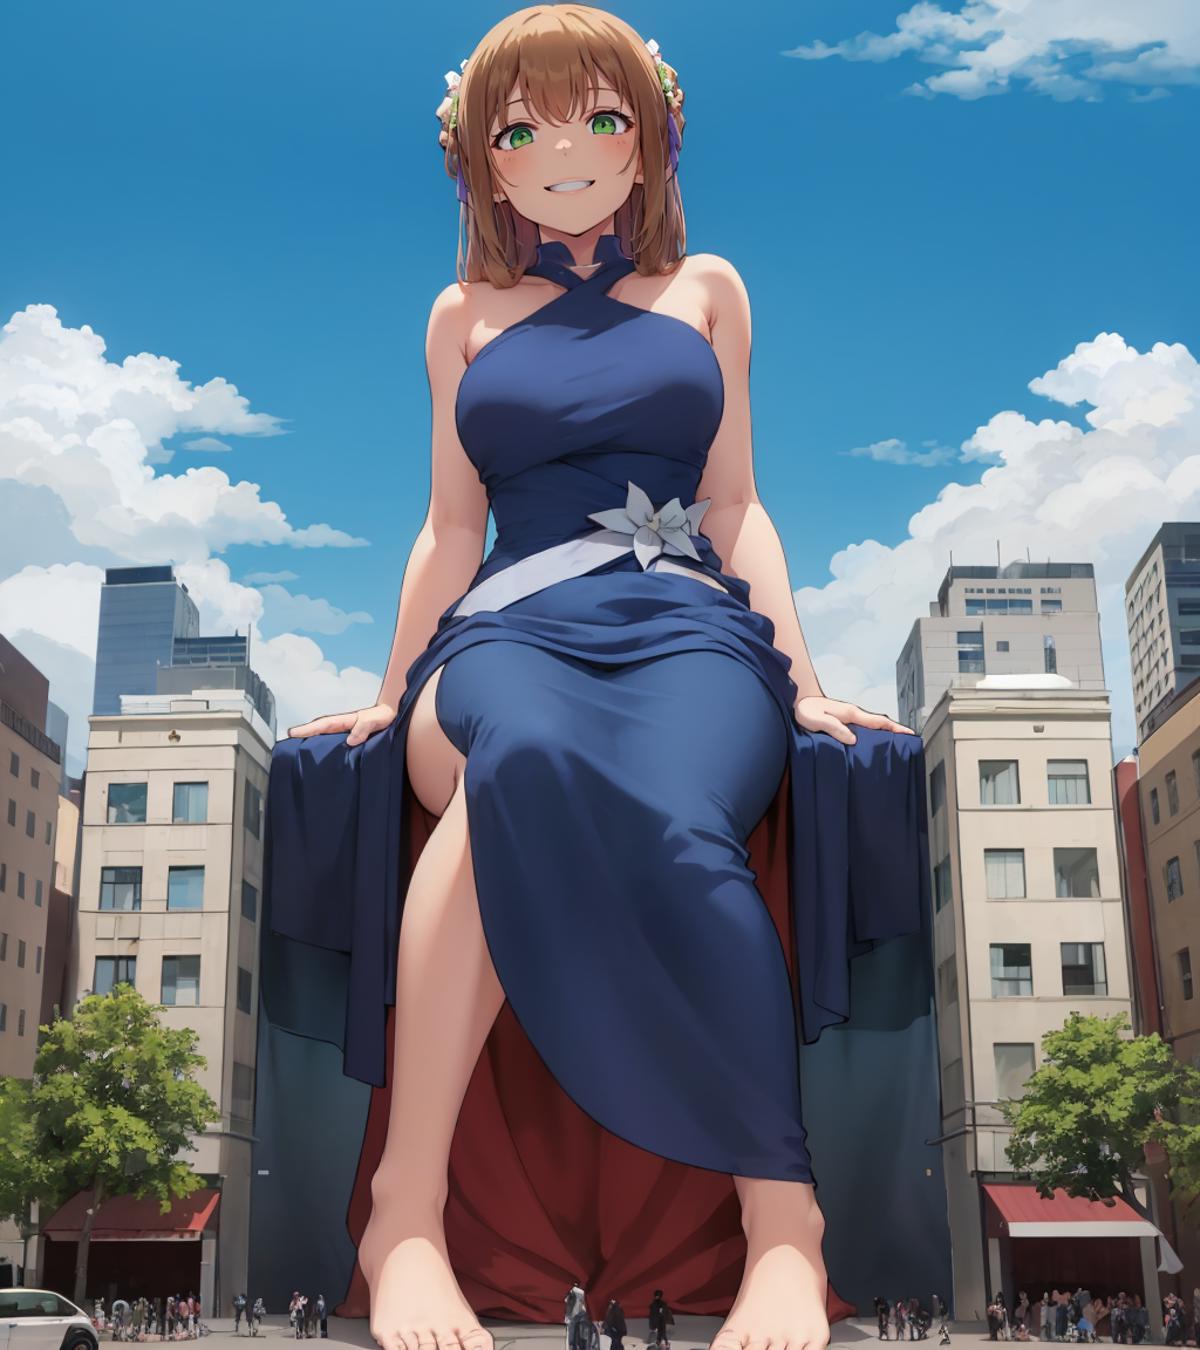 Anime character sitting on a statue in a blue dress.